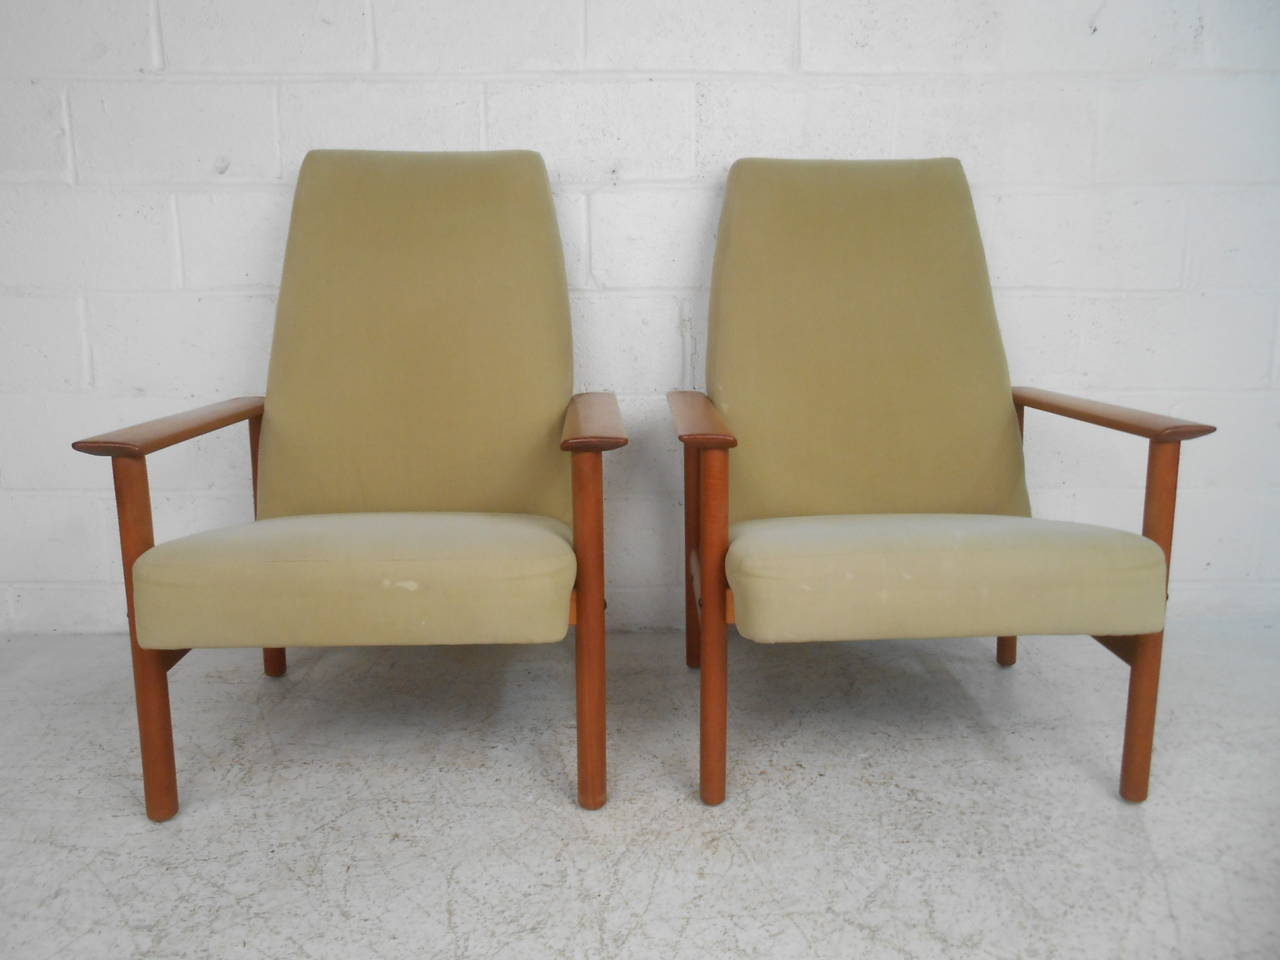 This matching pair of Mid-Century lounge chairs offers comfortable high back seating for any interior teak frames and unique angled backs make these a stylish and comfy addition to any home. Please confirm item location (NY or NJ.)